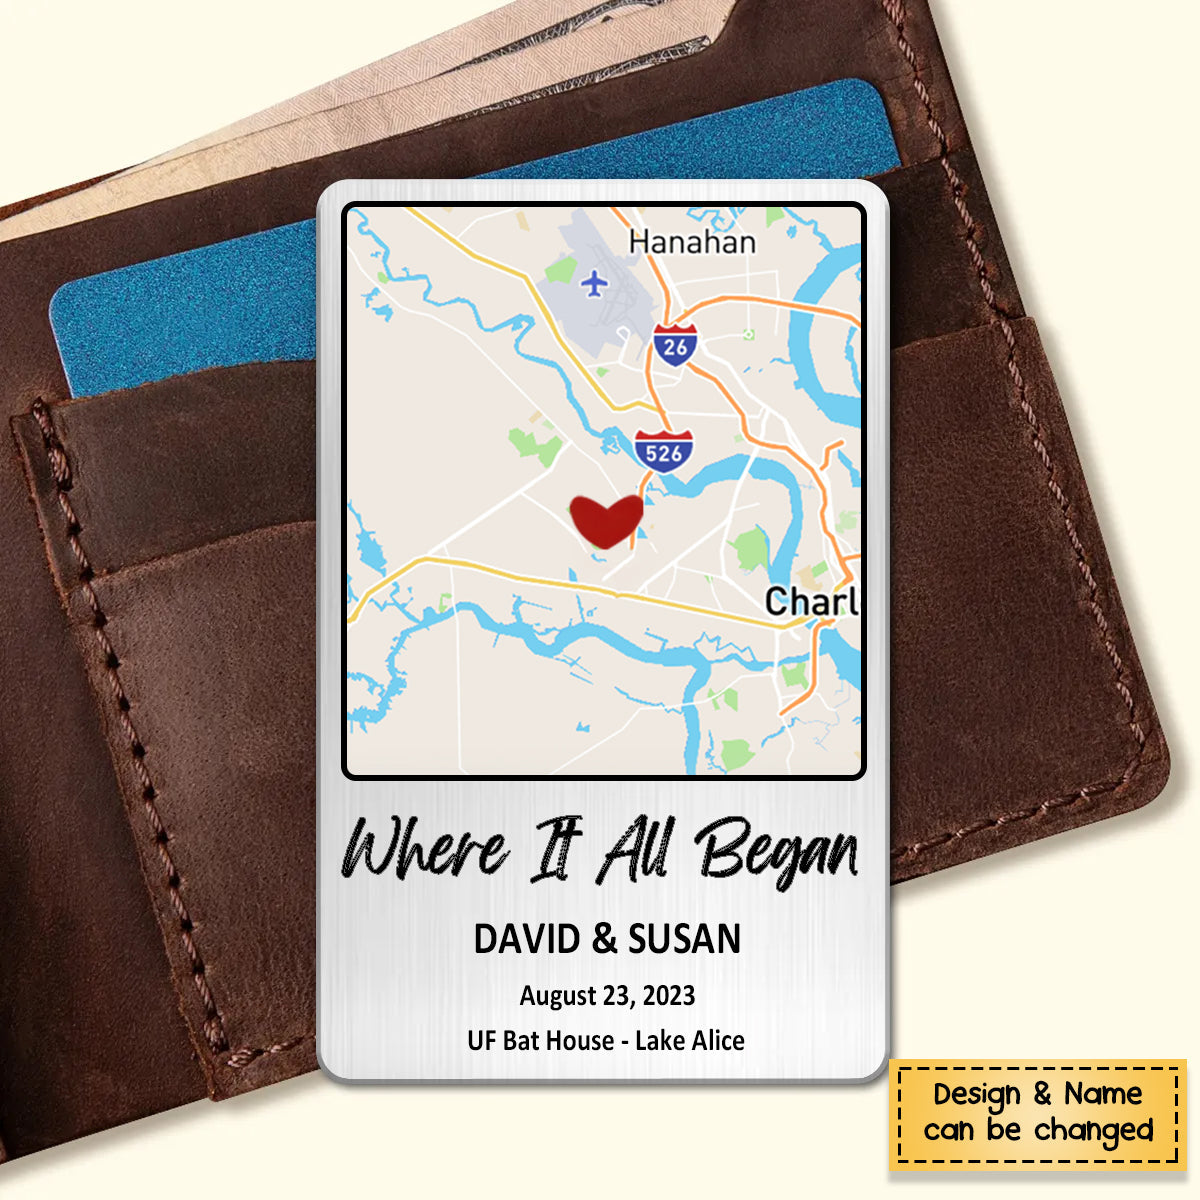 Our First Date - Personalized Map Aluminum Wallet Card - Gift For Couple